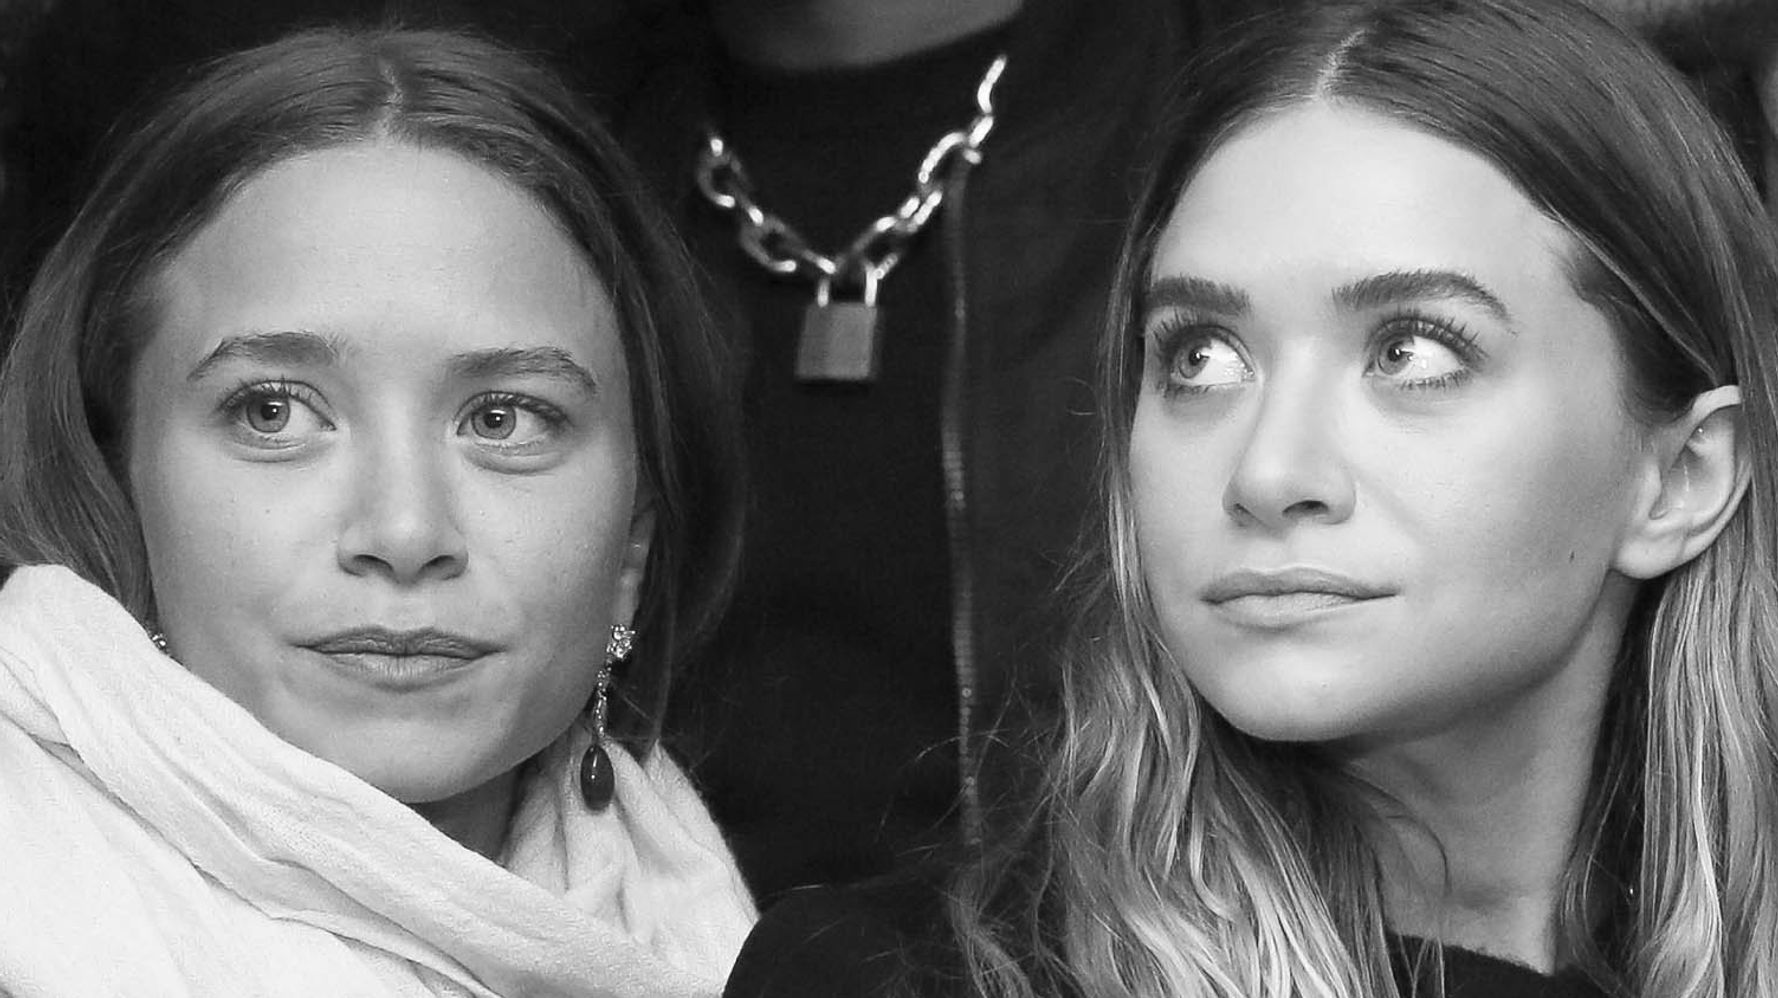 There S A New Strangest Thing You Didn T Know About The Olsen Twins